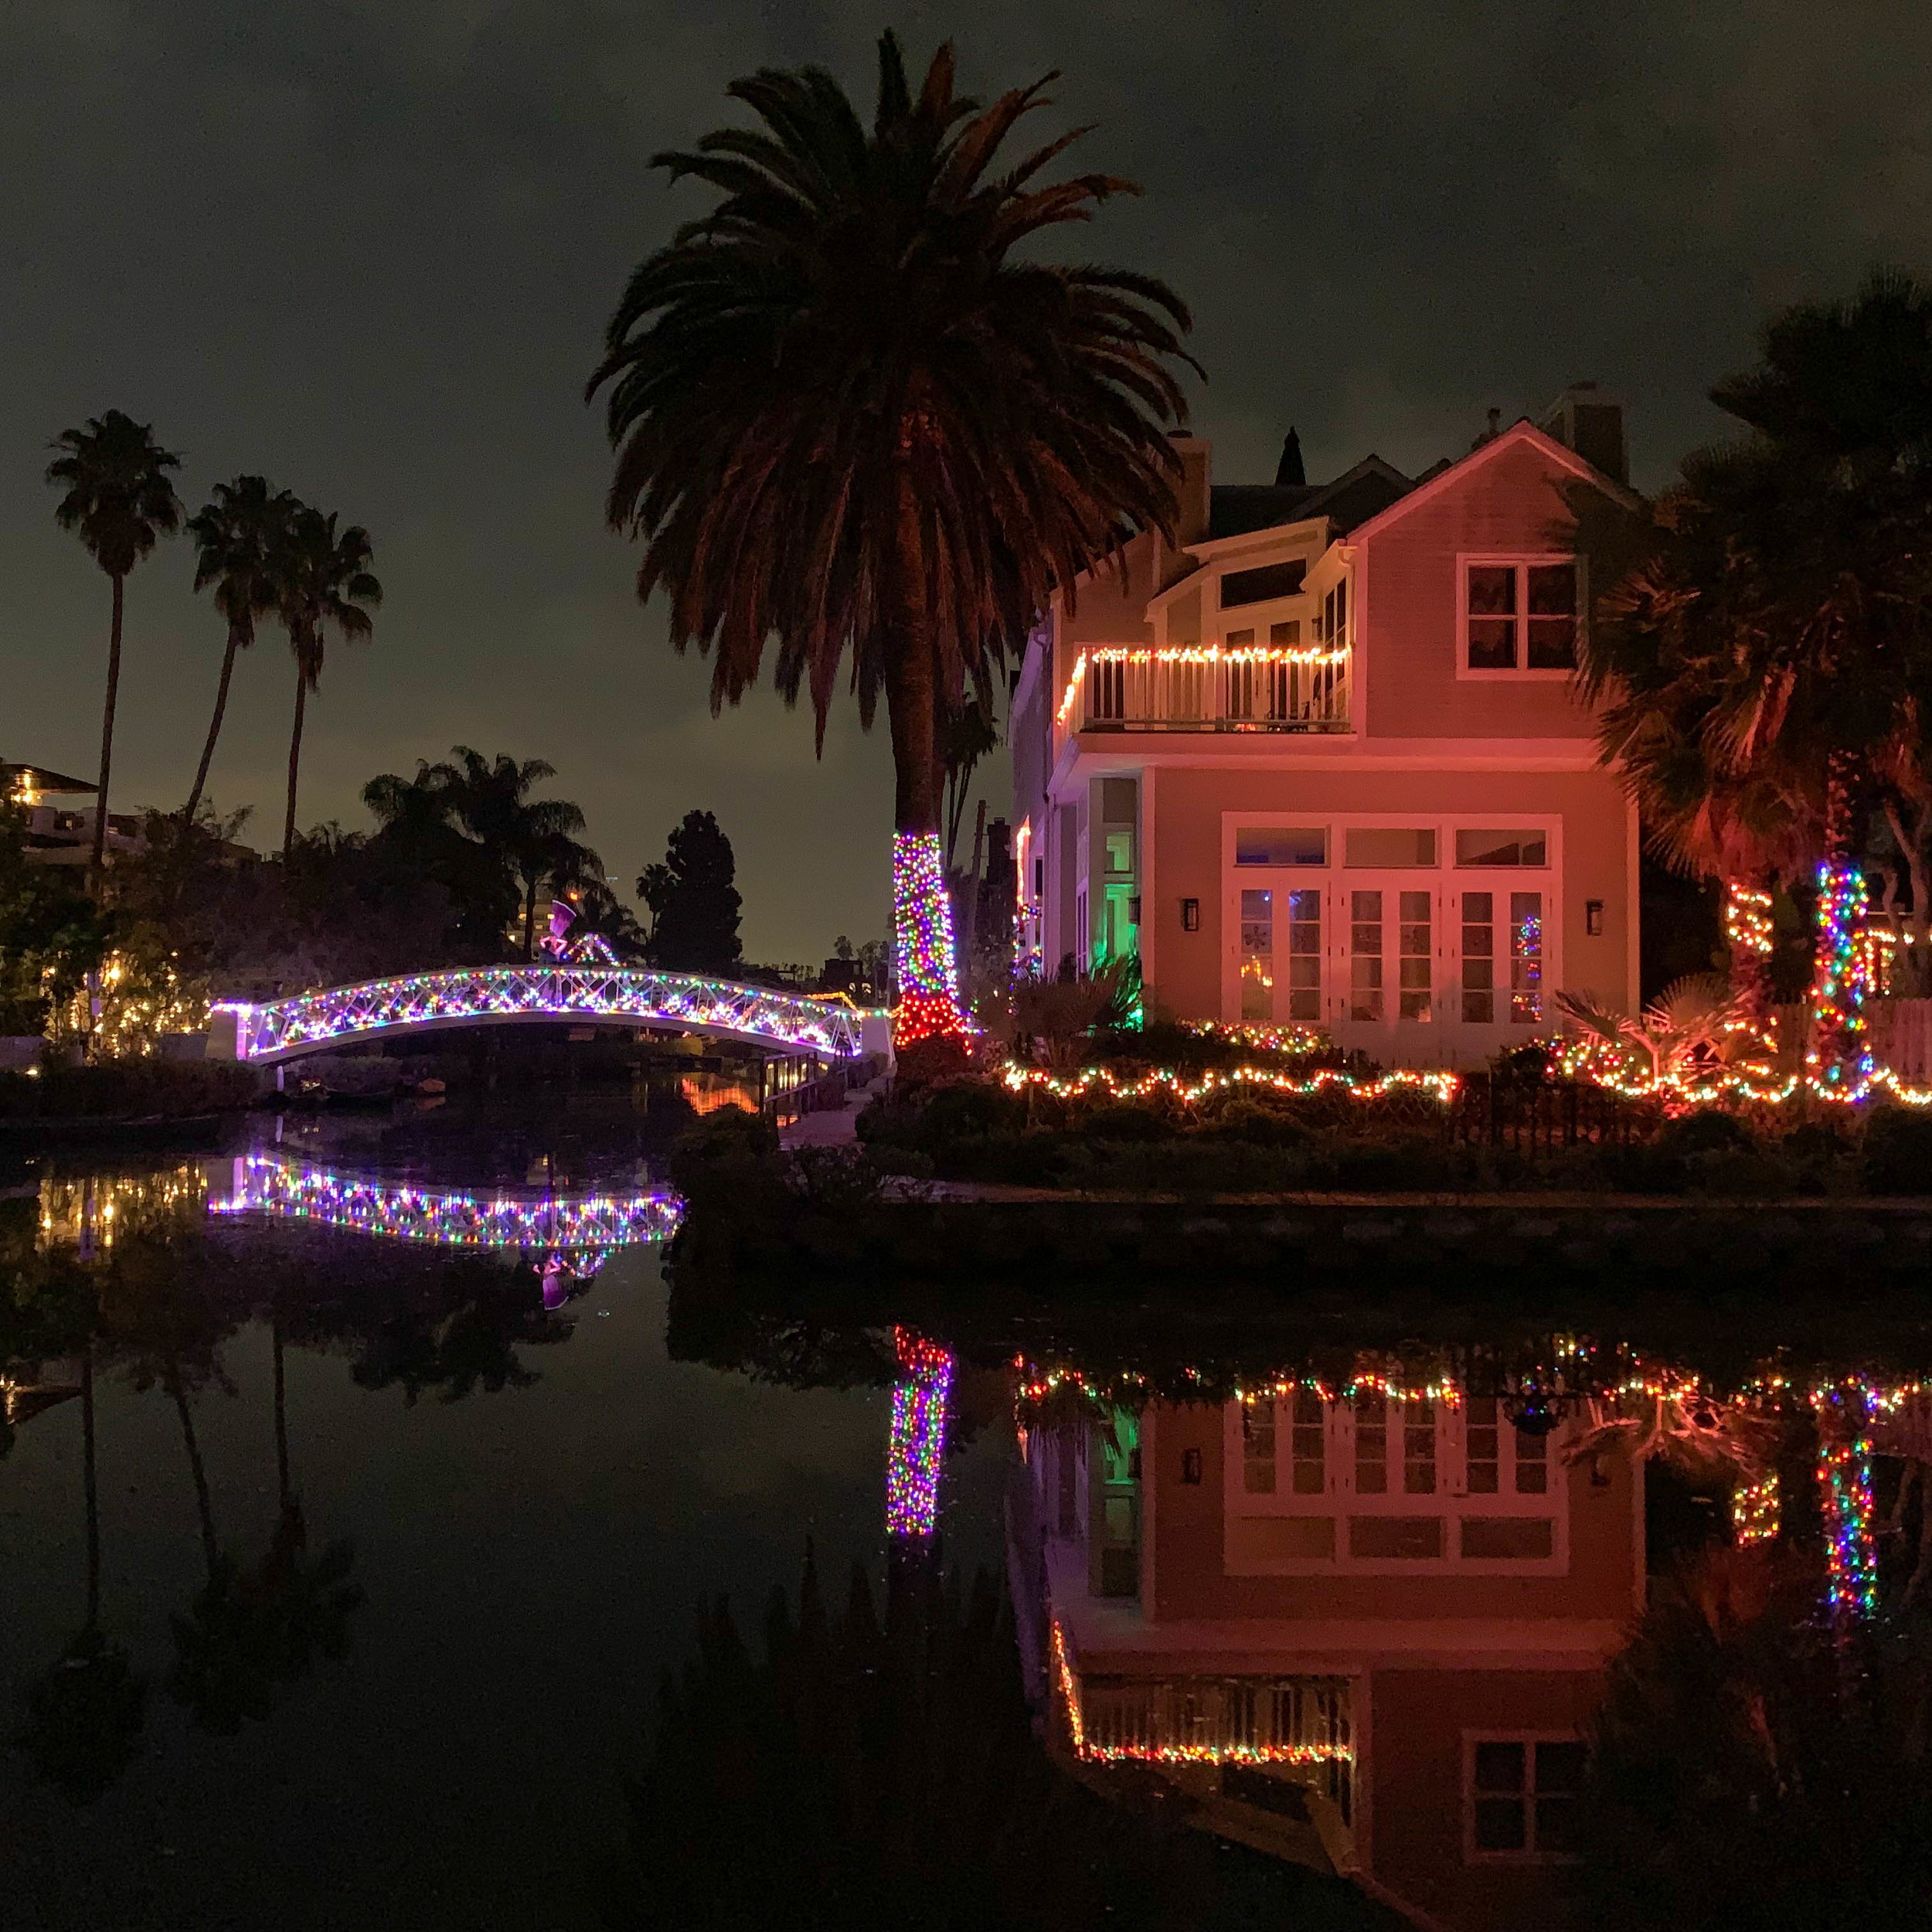 Christmas Lights in Los Angeles Venice Canals - Home Decorations